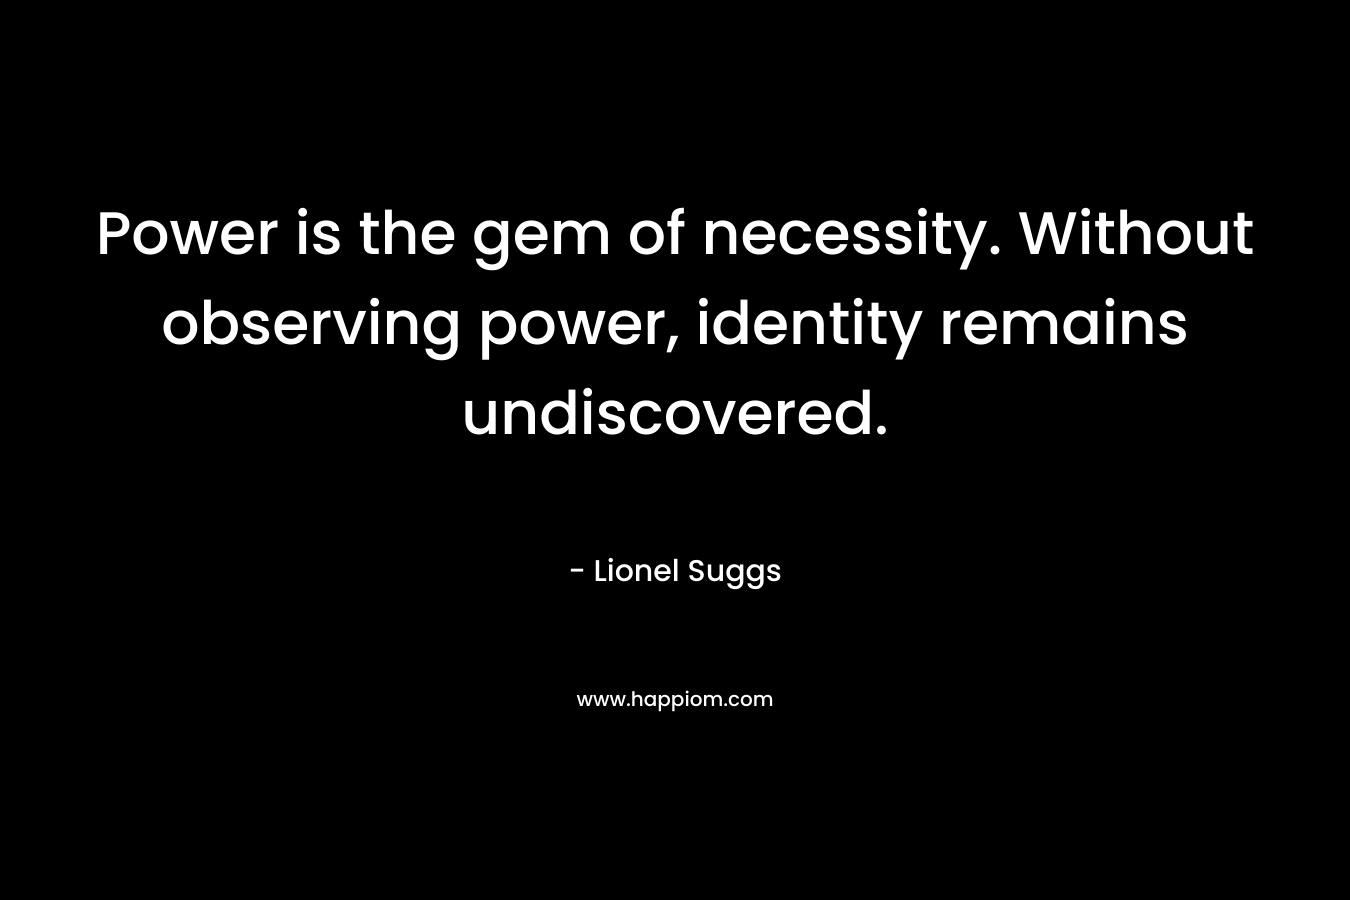 Power is the gem of necessity. Without observing power, identity remains undiscovered. – Lionel Suggs